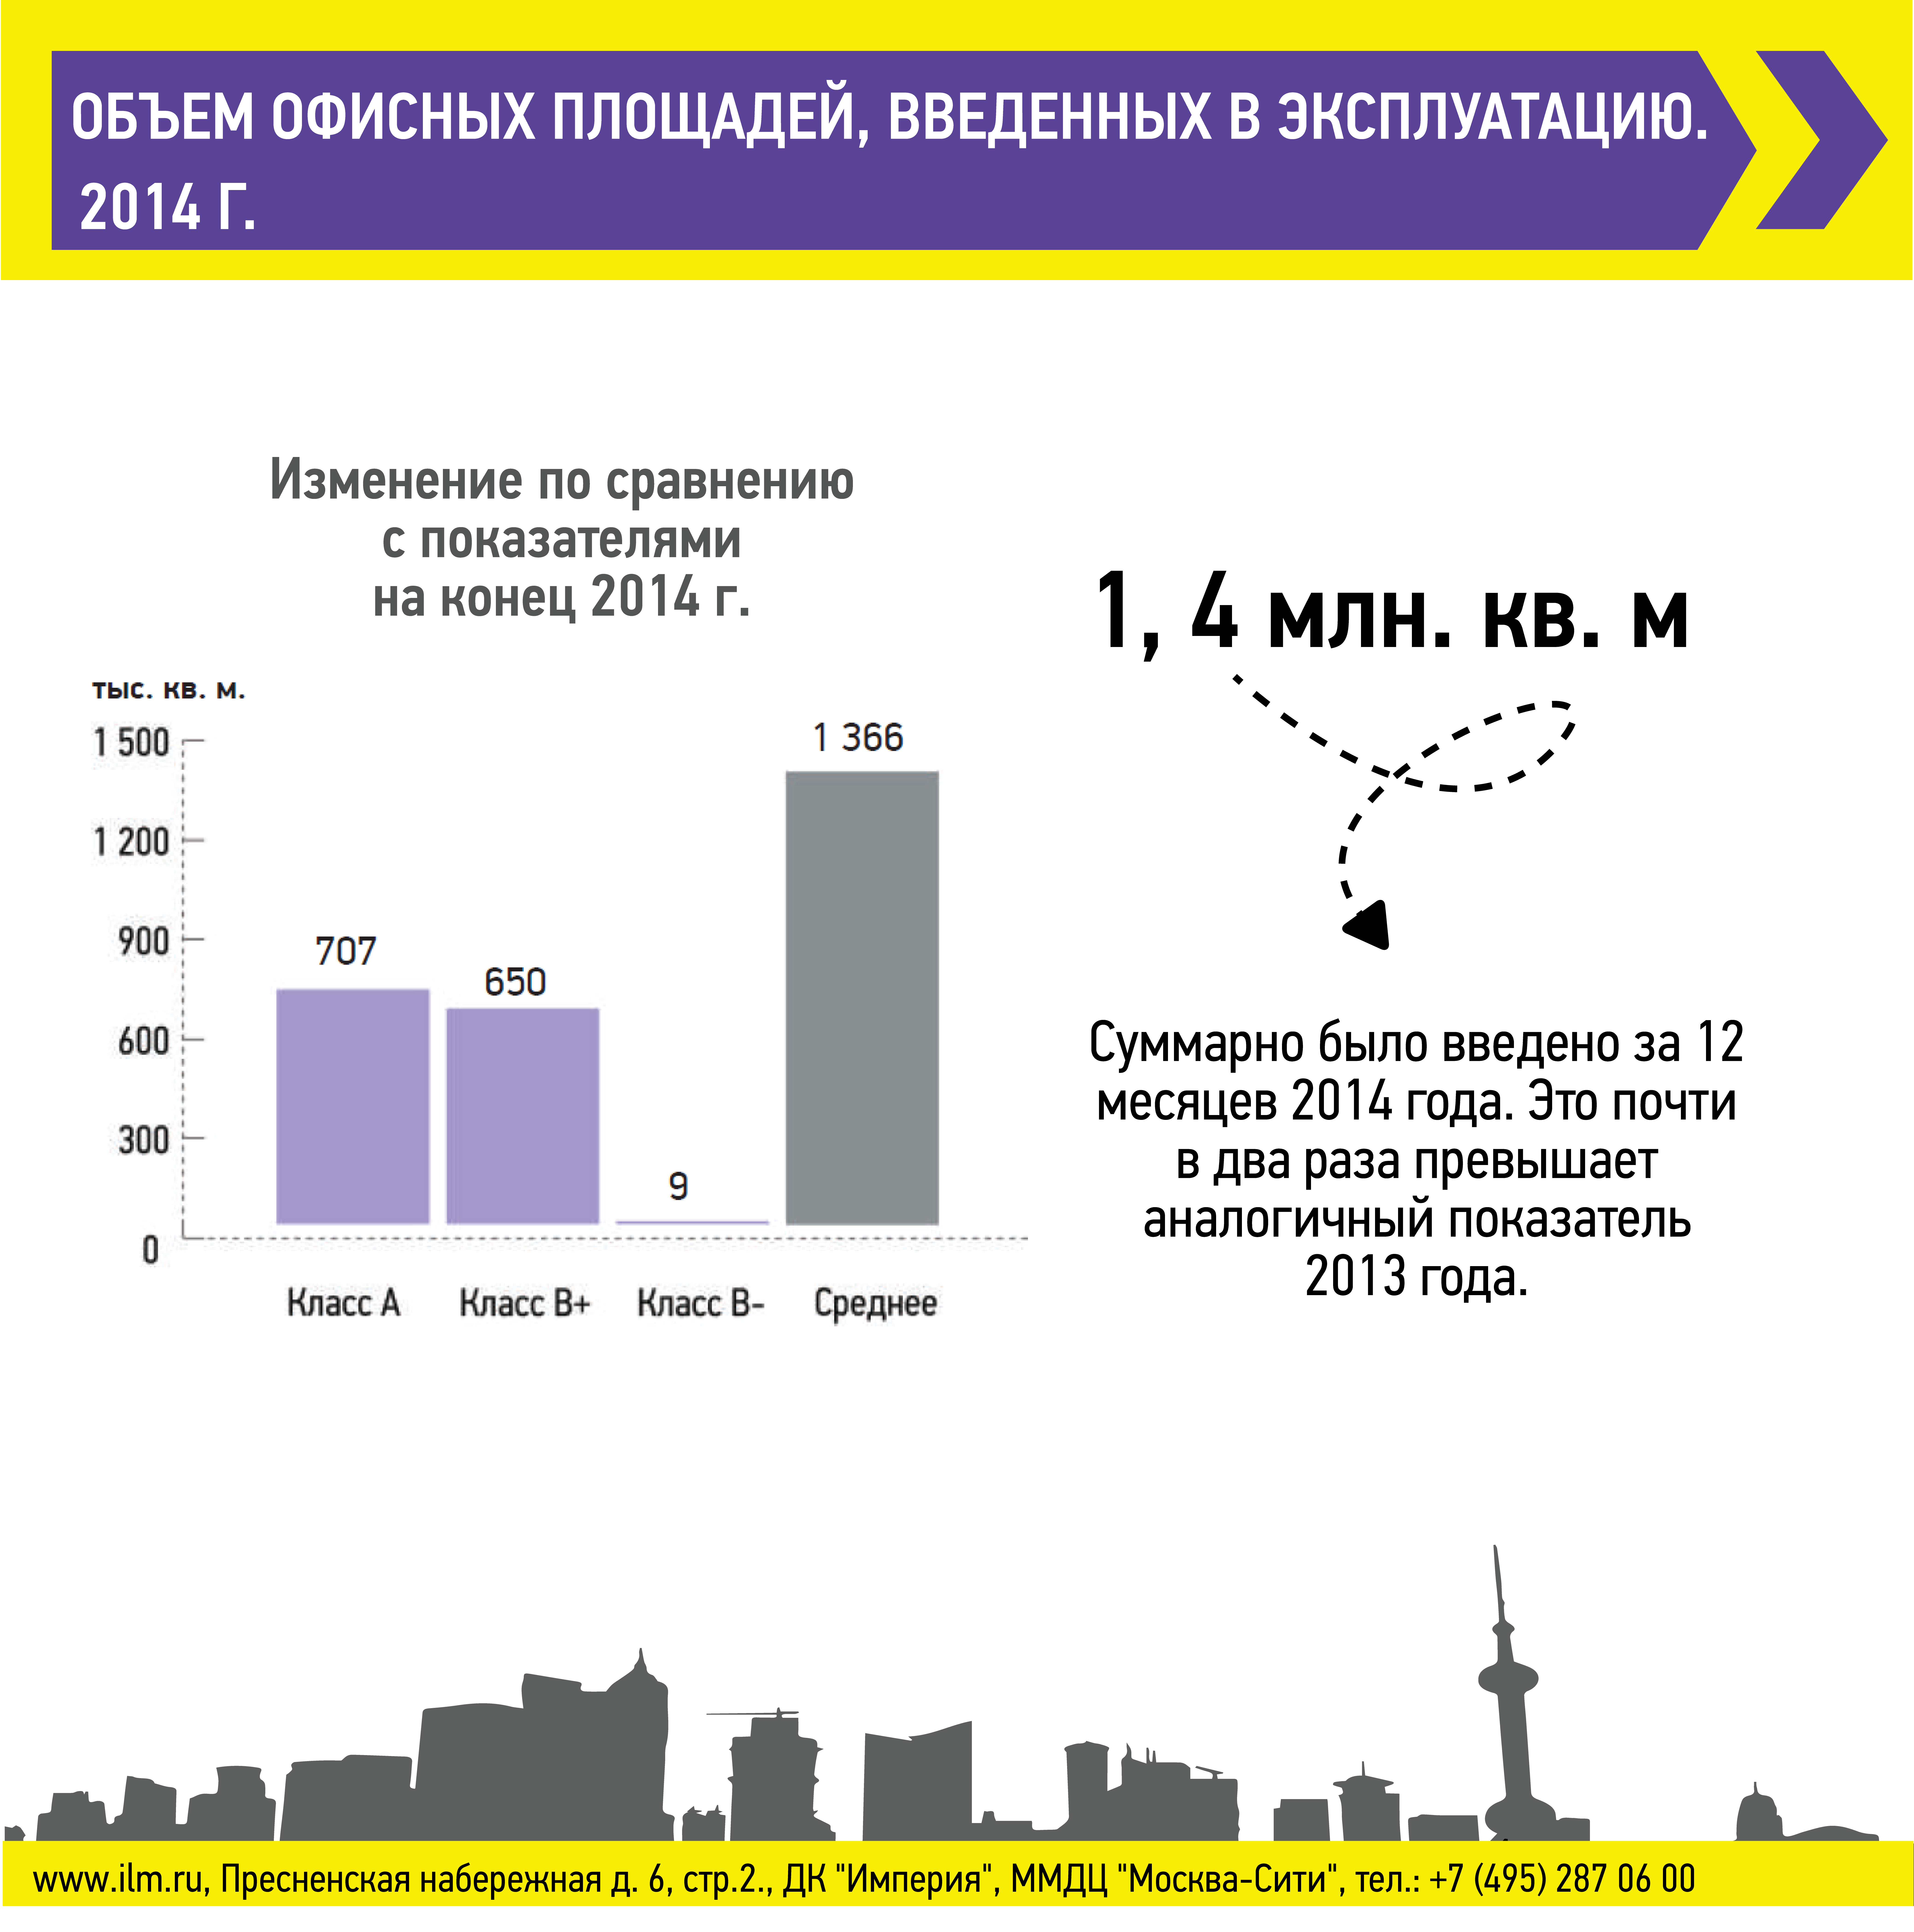 Number of square meters delivered in 2014